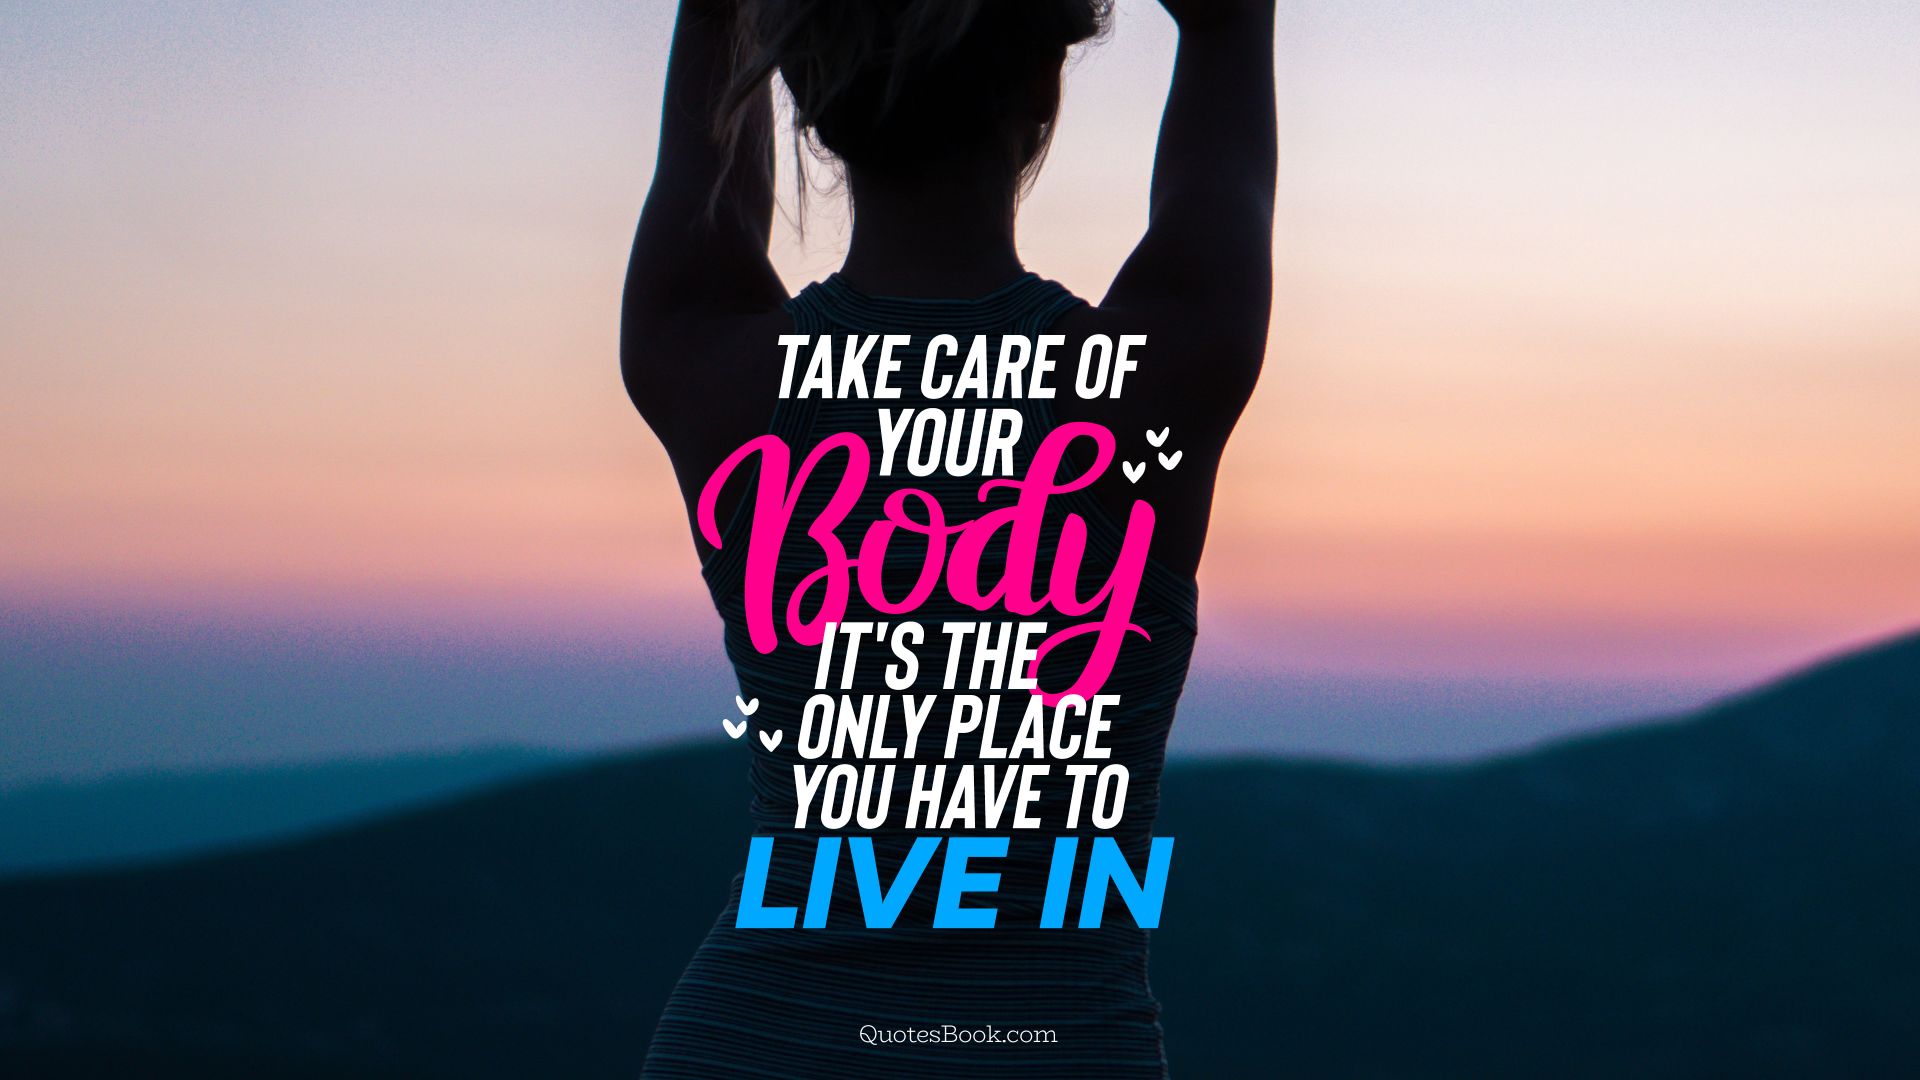 Take Care Of Your Body It S The Only Place You Have - Take Care Of Your Body It The Only Place You Live - HD Wallpaper 